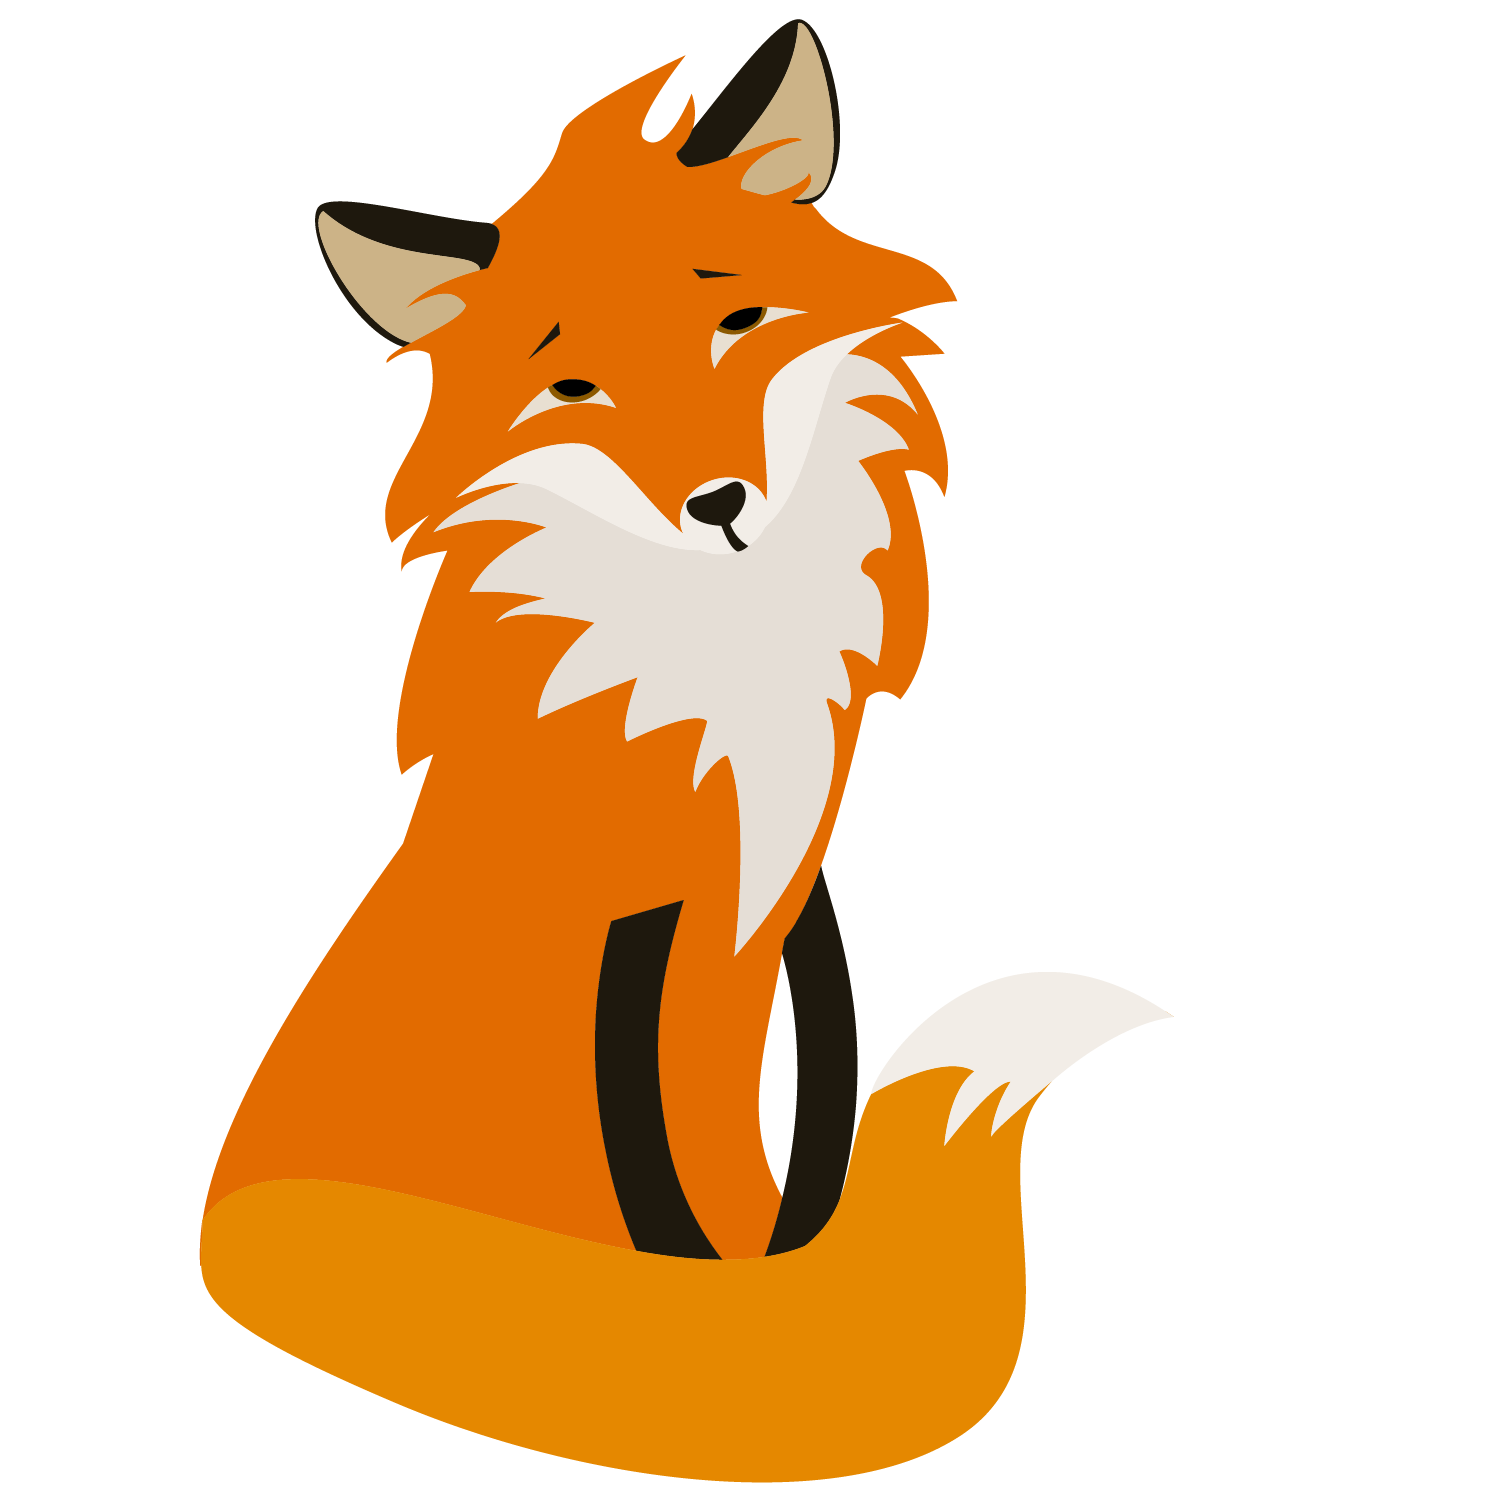 Red Fox Head Logo Hd Png Download Kindpng Images